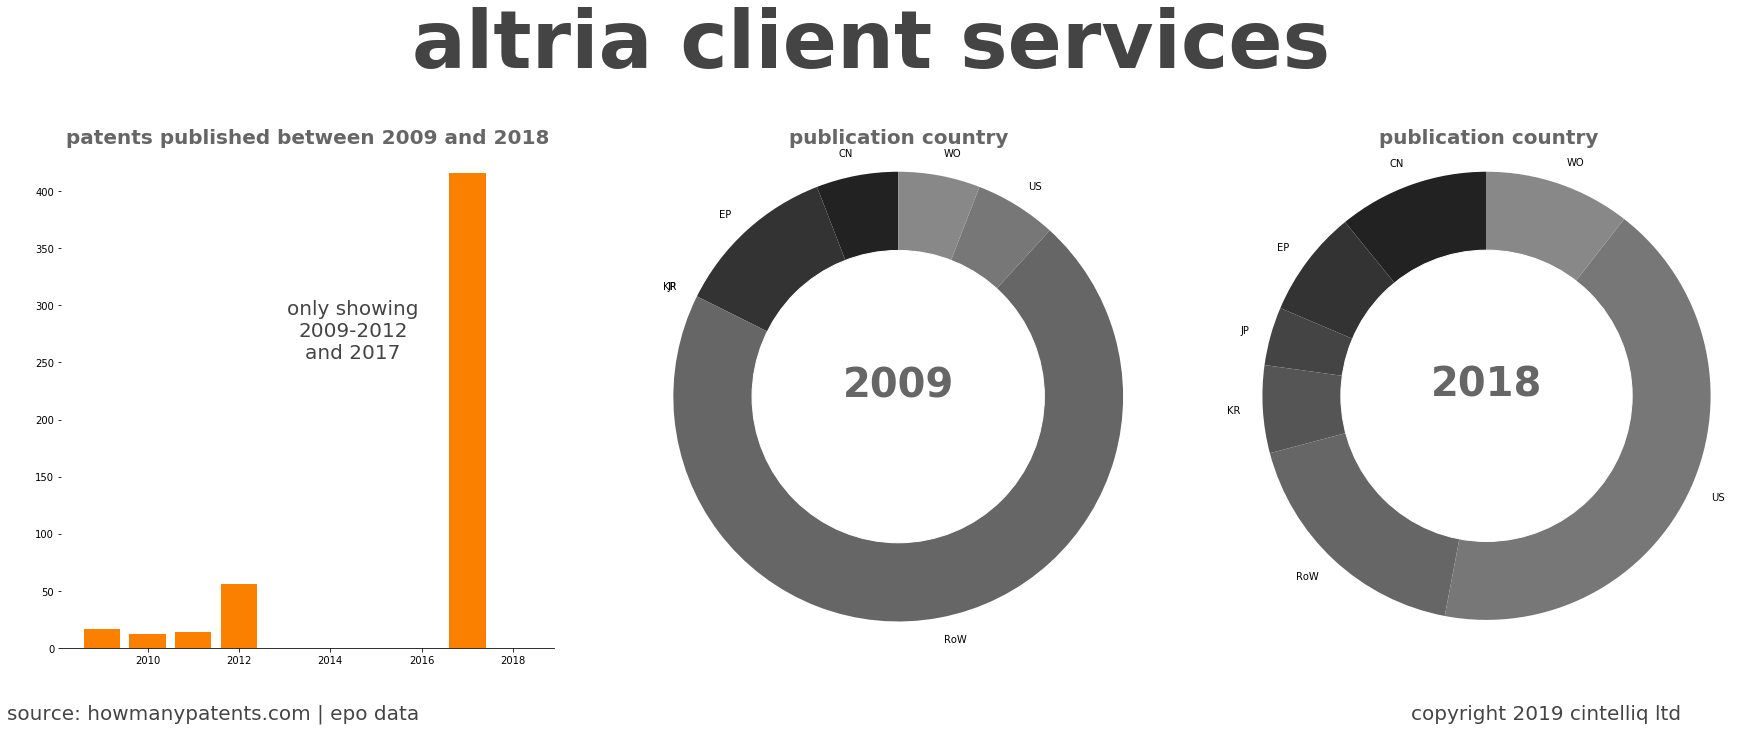 summary of patents for Altria Client Services